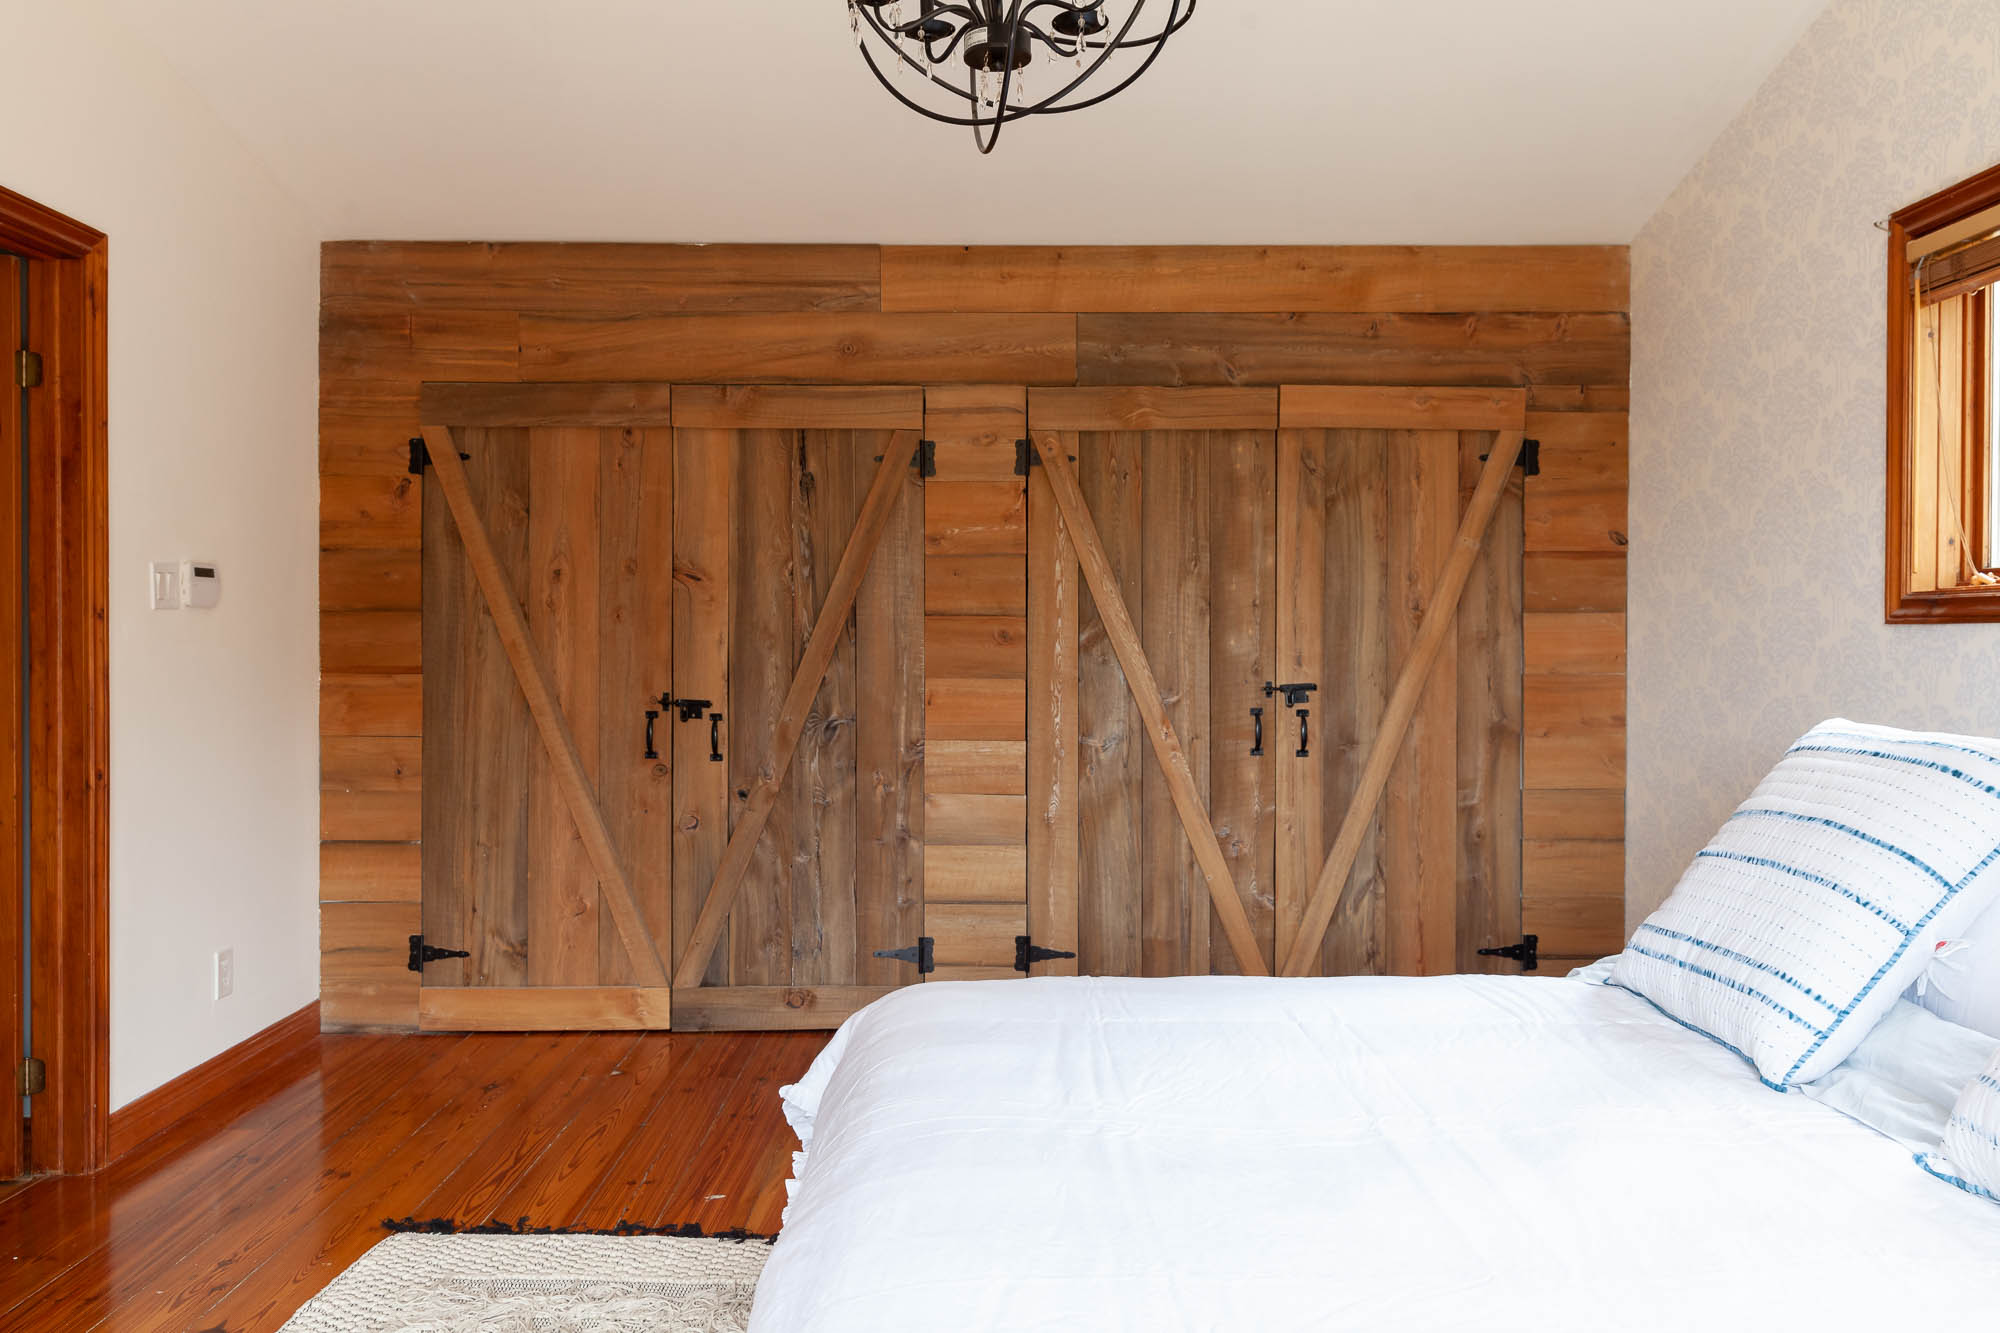 master bedroom with barn doors on closet and reclaimed wood floors